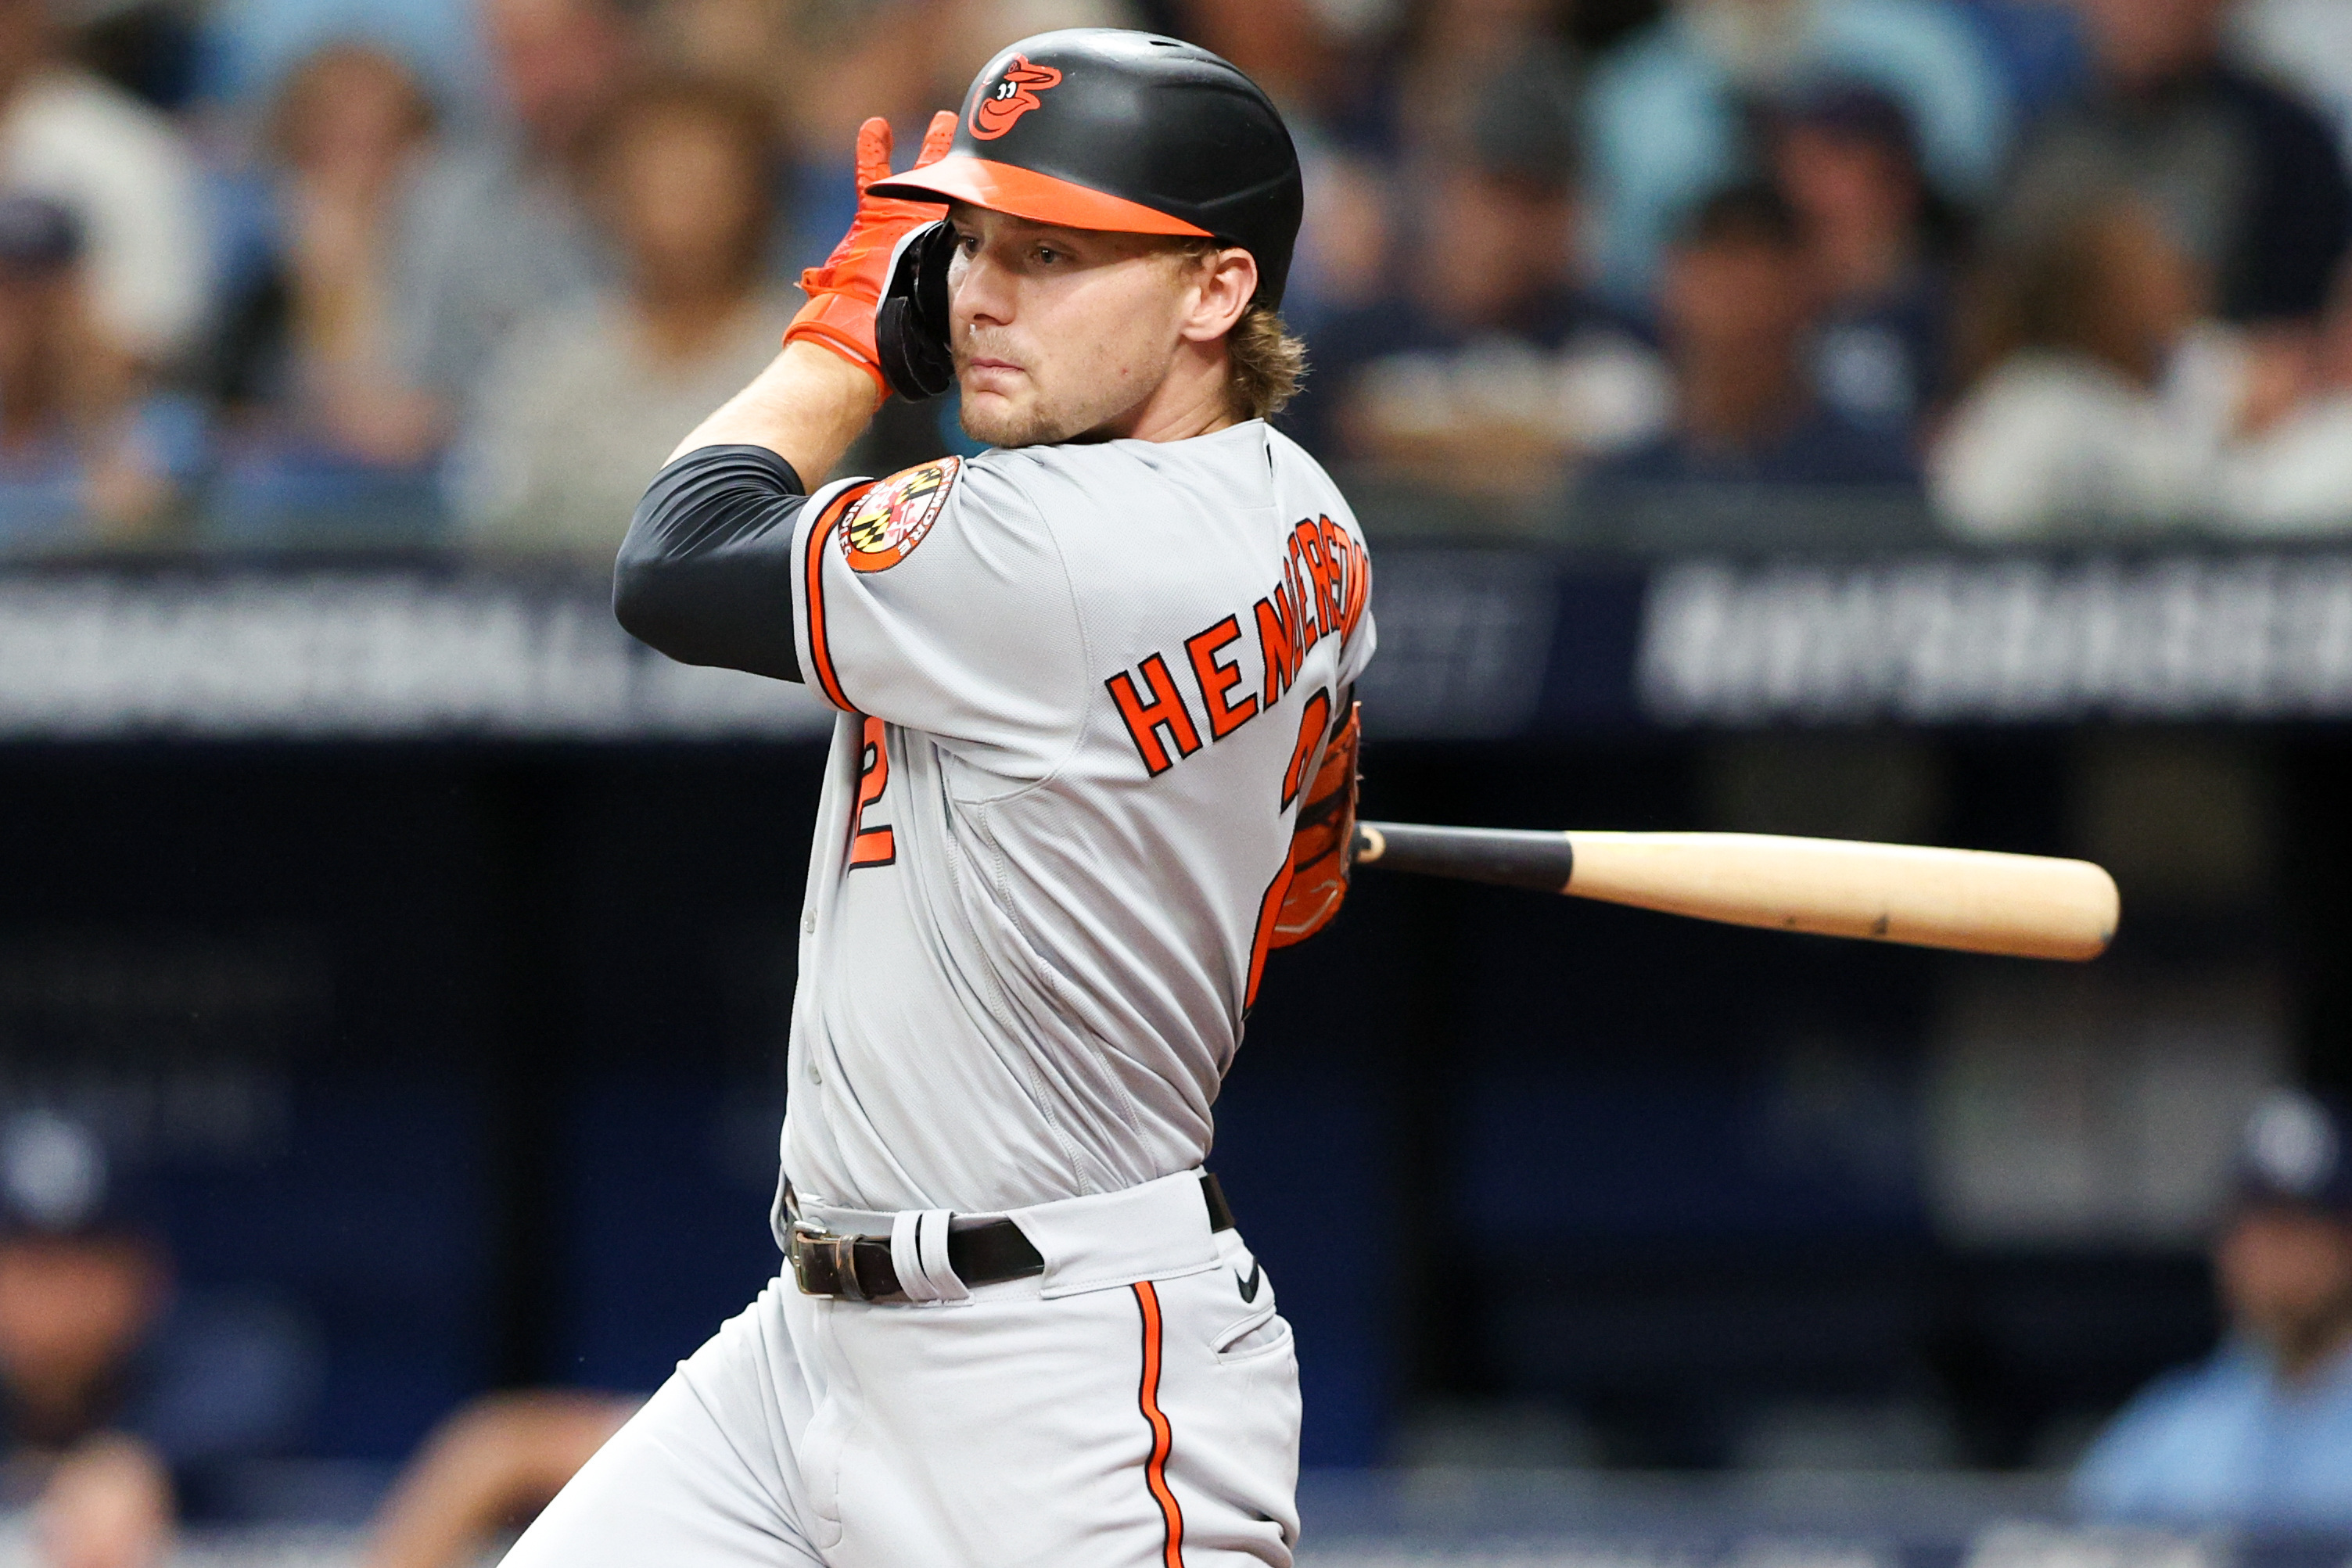 MLB stock report: Orioles up, Rays down as second half heats up, SC Picks